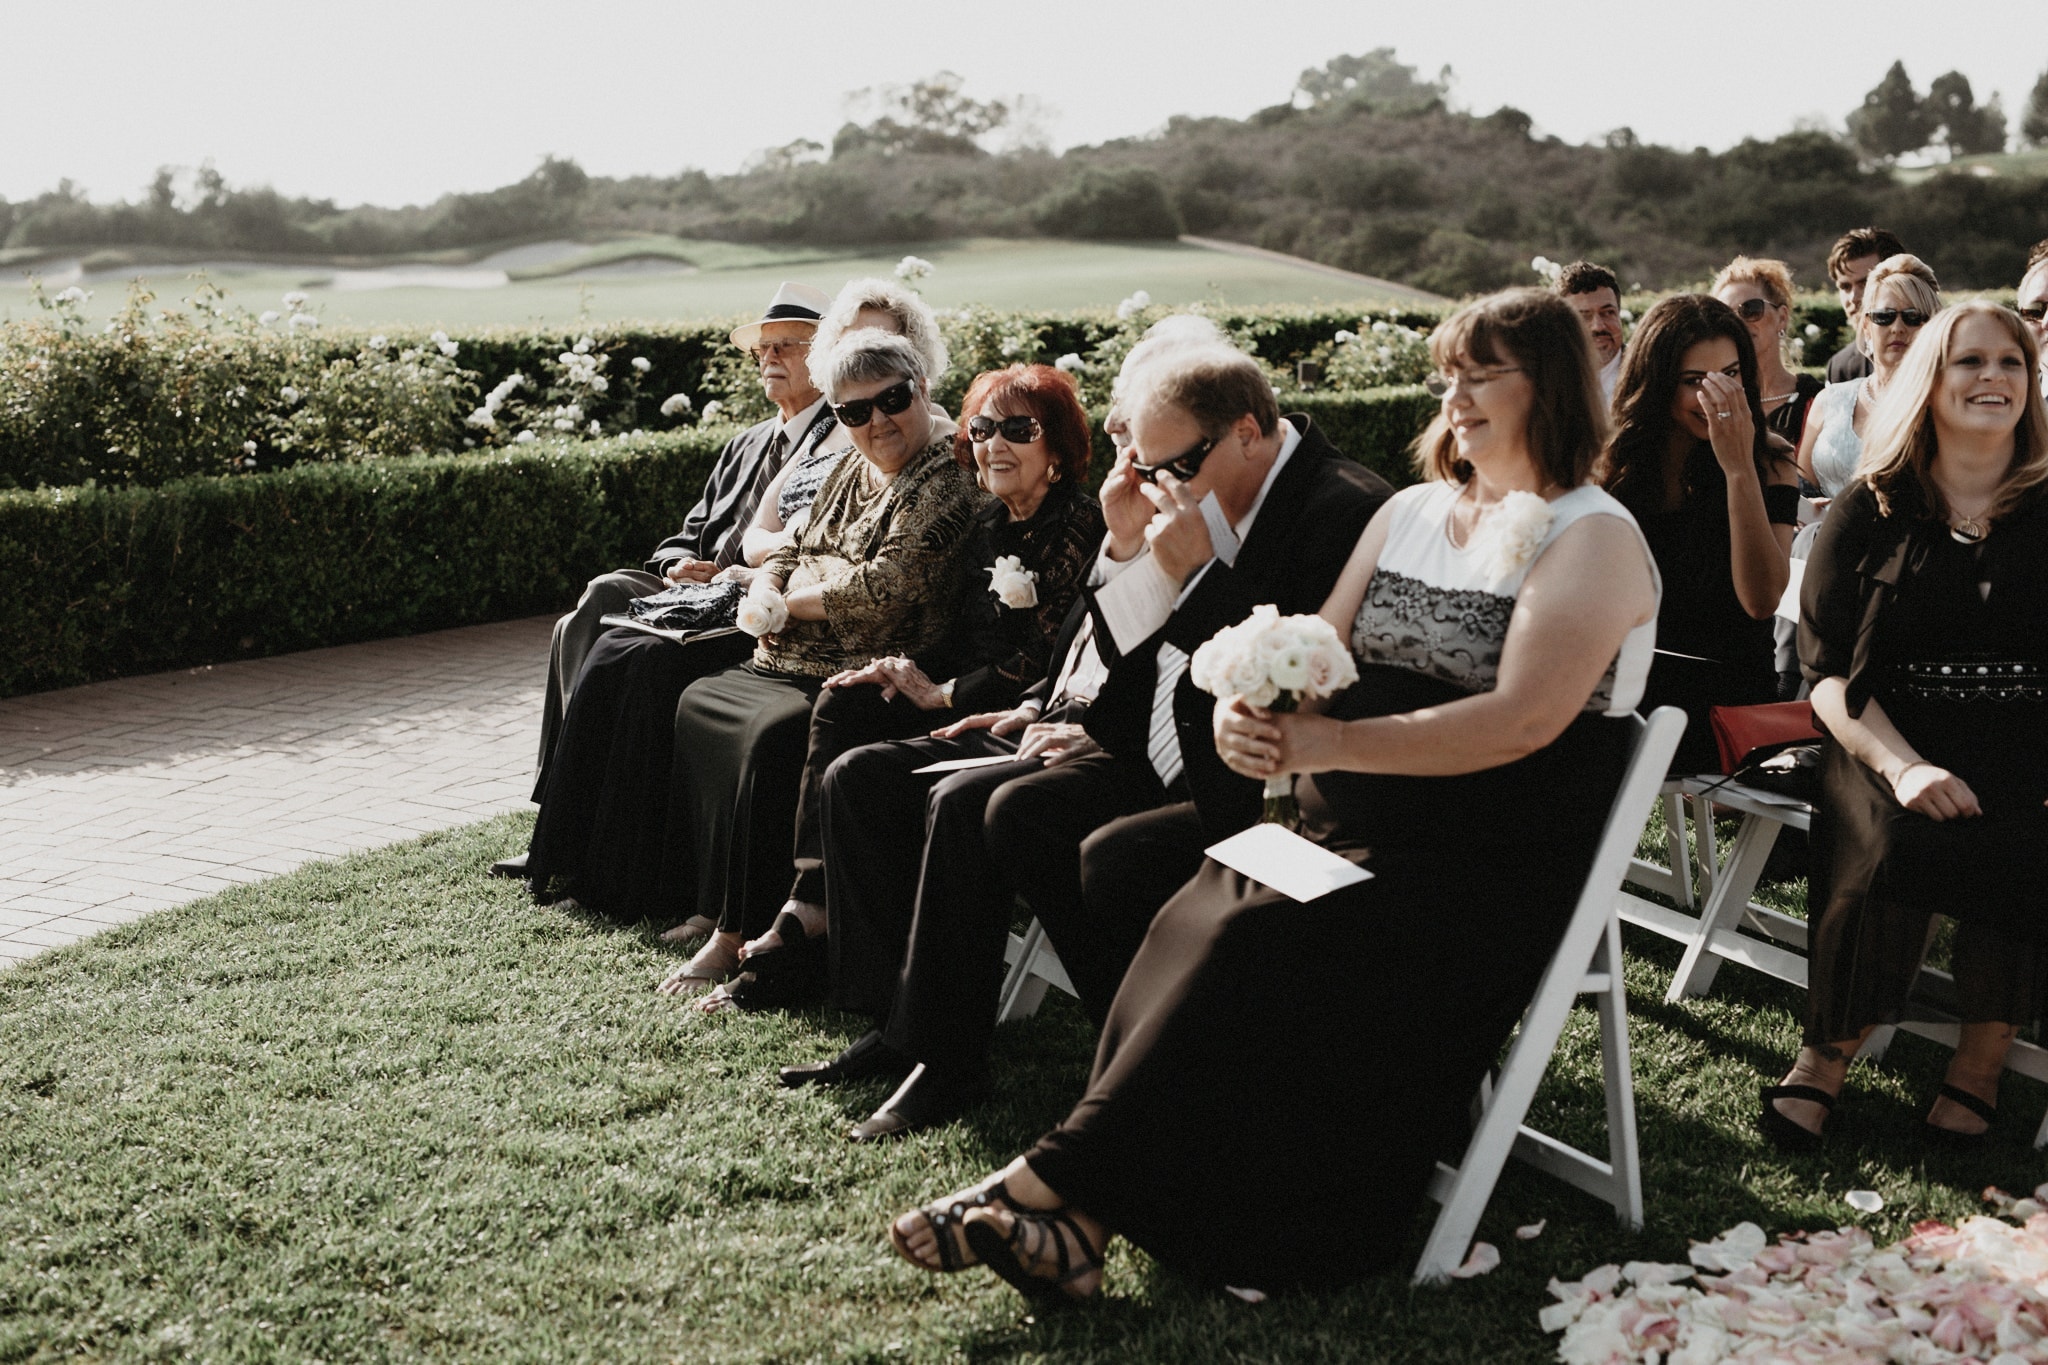 Guests sit in the courtyard at The Resort at Pelican Hill during a wedding ceremony.